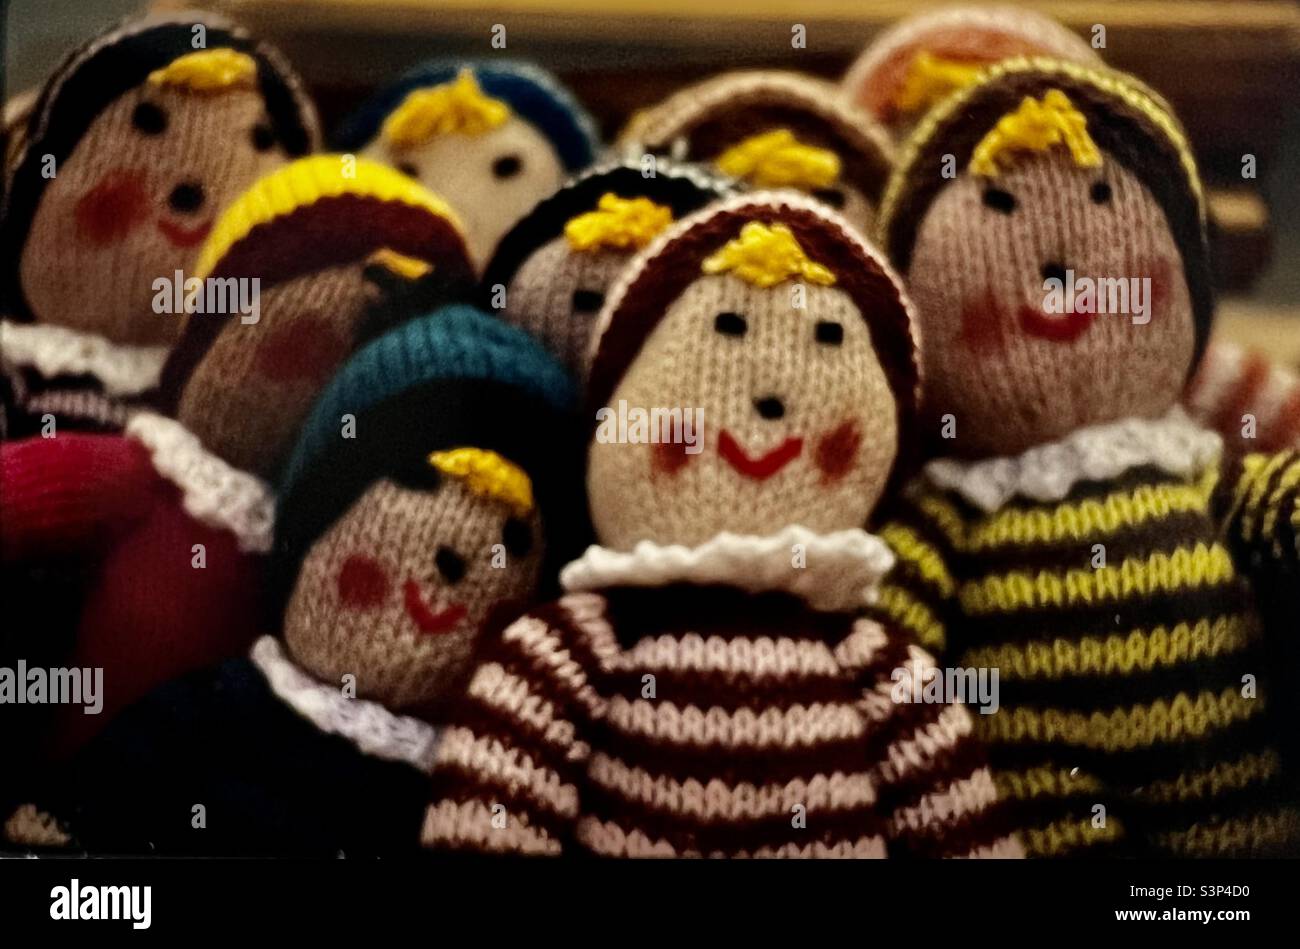 Handmade knitted dolls at London’s Greenwich Market Stock Photo